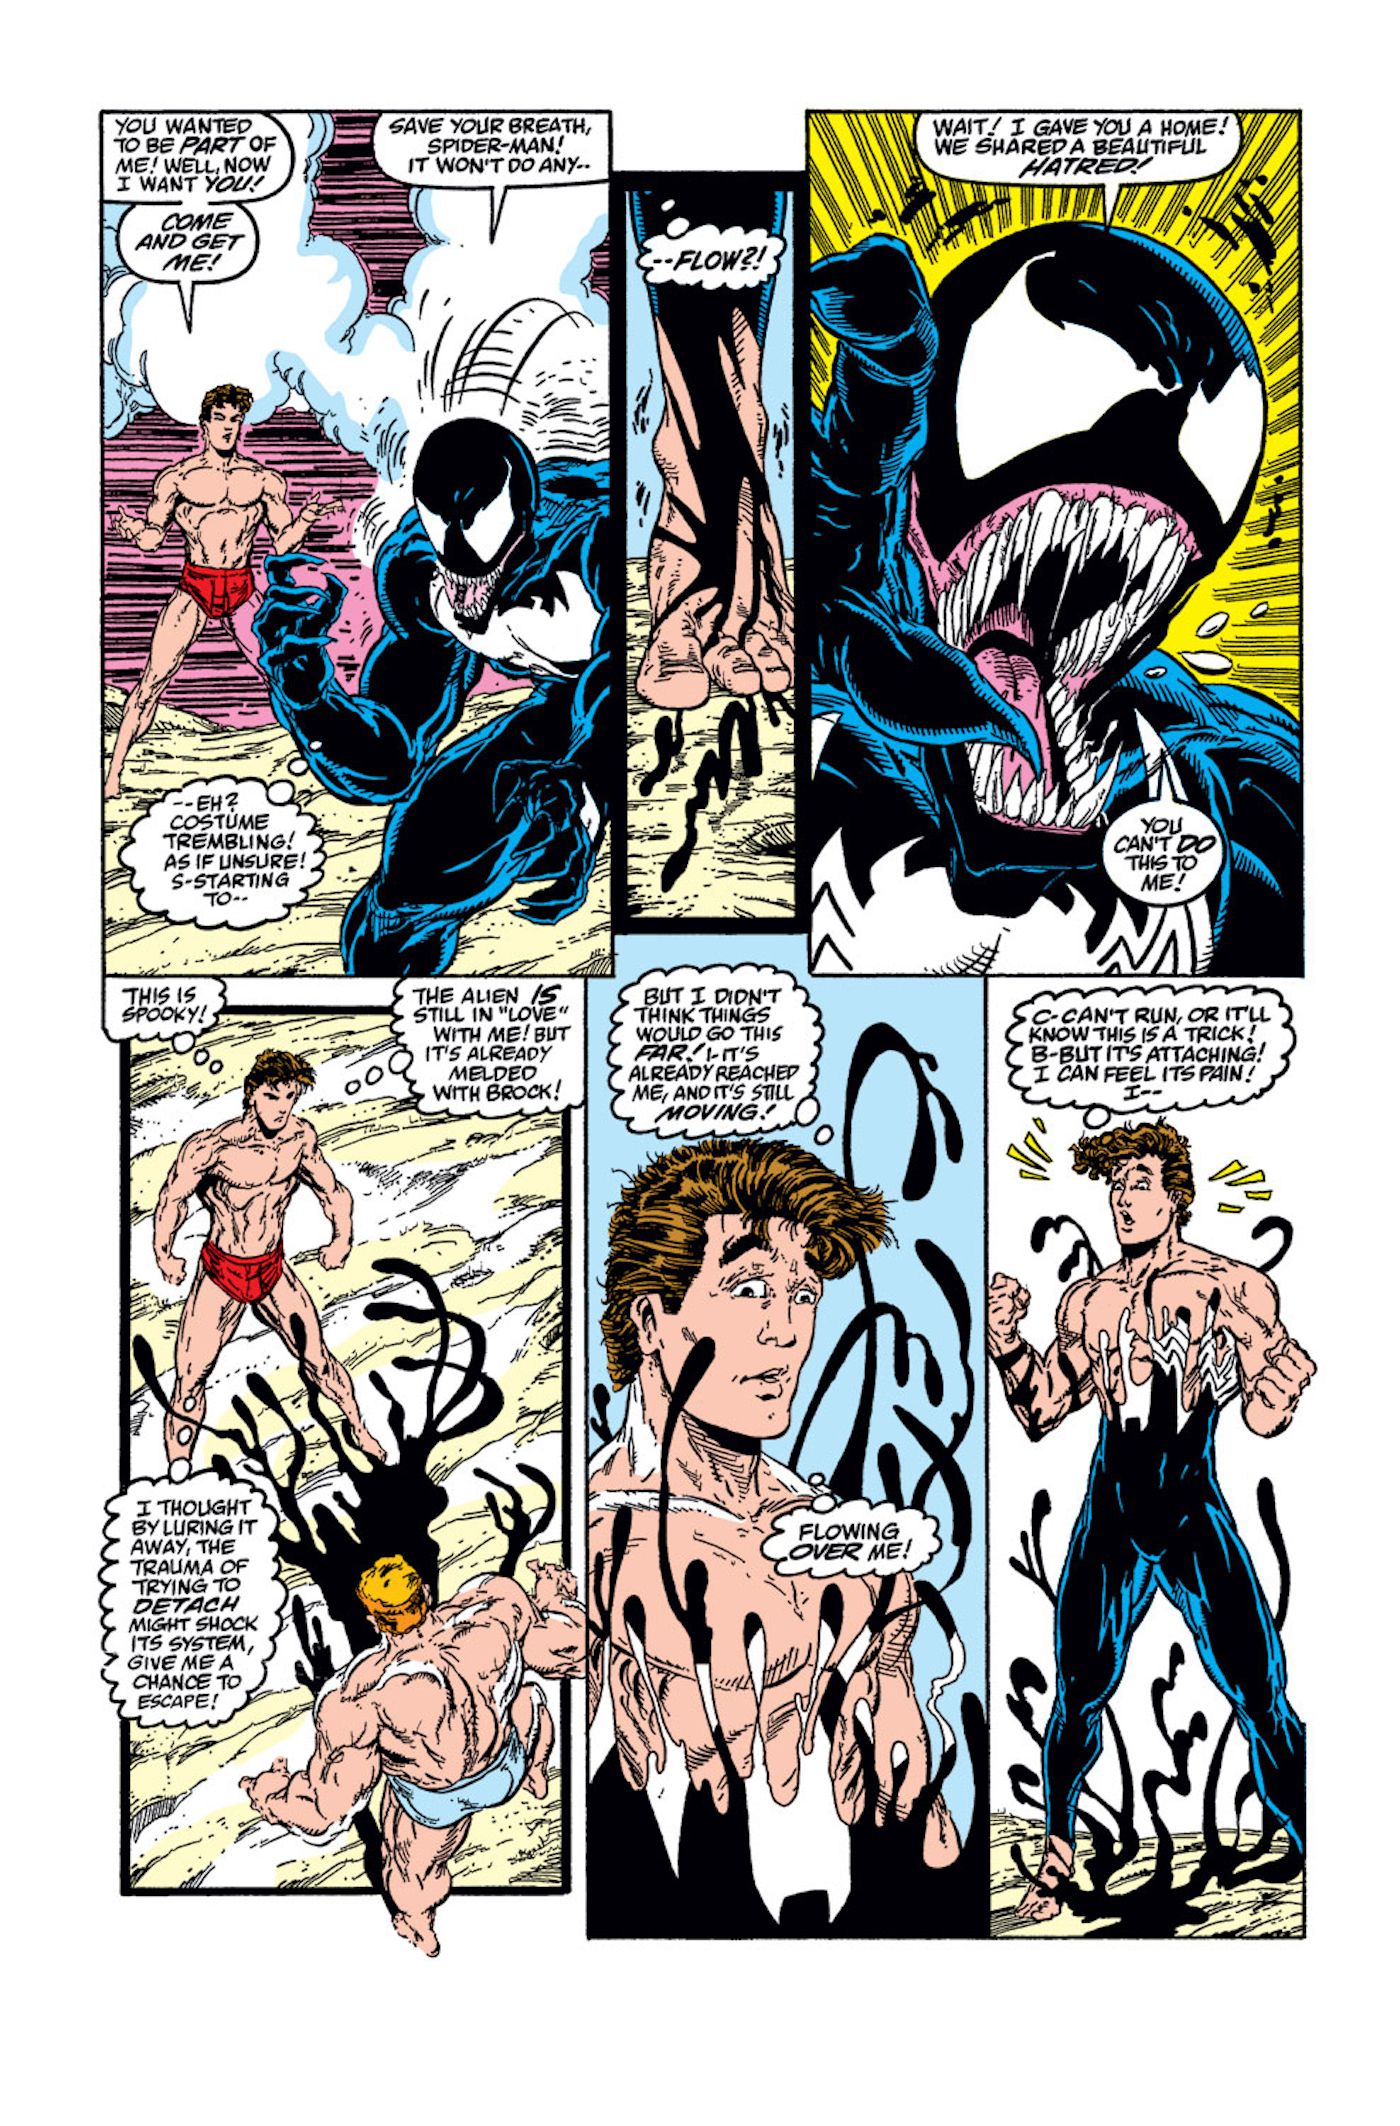 An Early Spider-Man Comic Foreshadowed Venom’s King In Black Twist